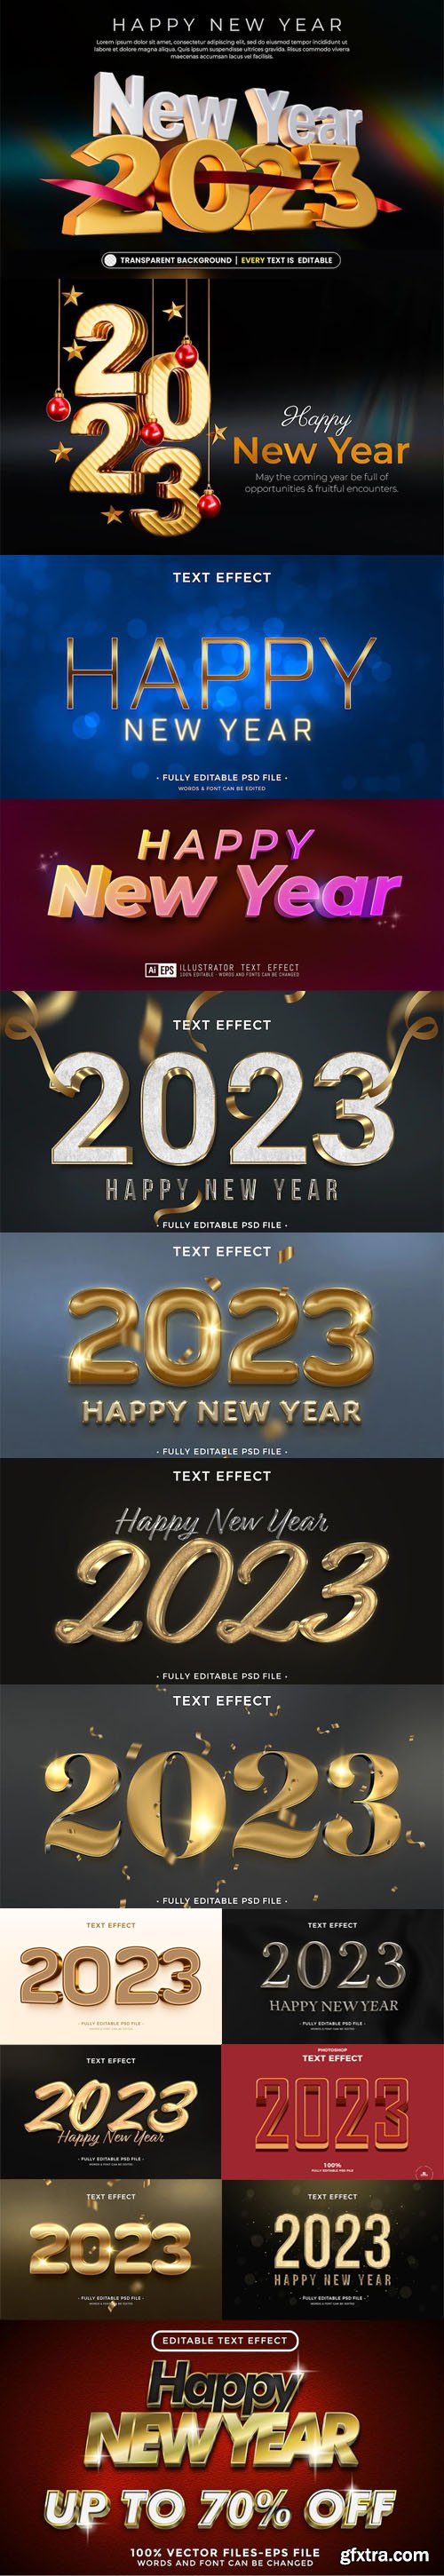 15 Happy New Year 2023 Text Effects Templates